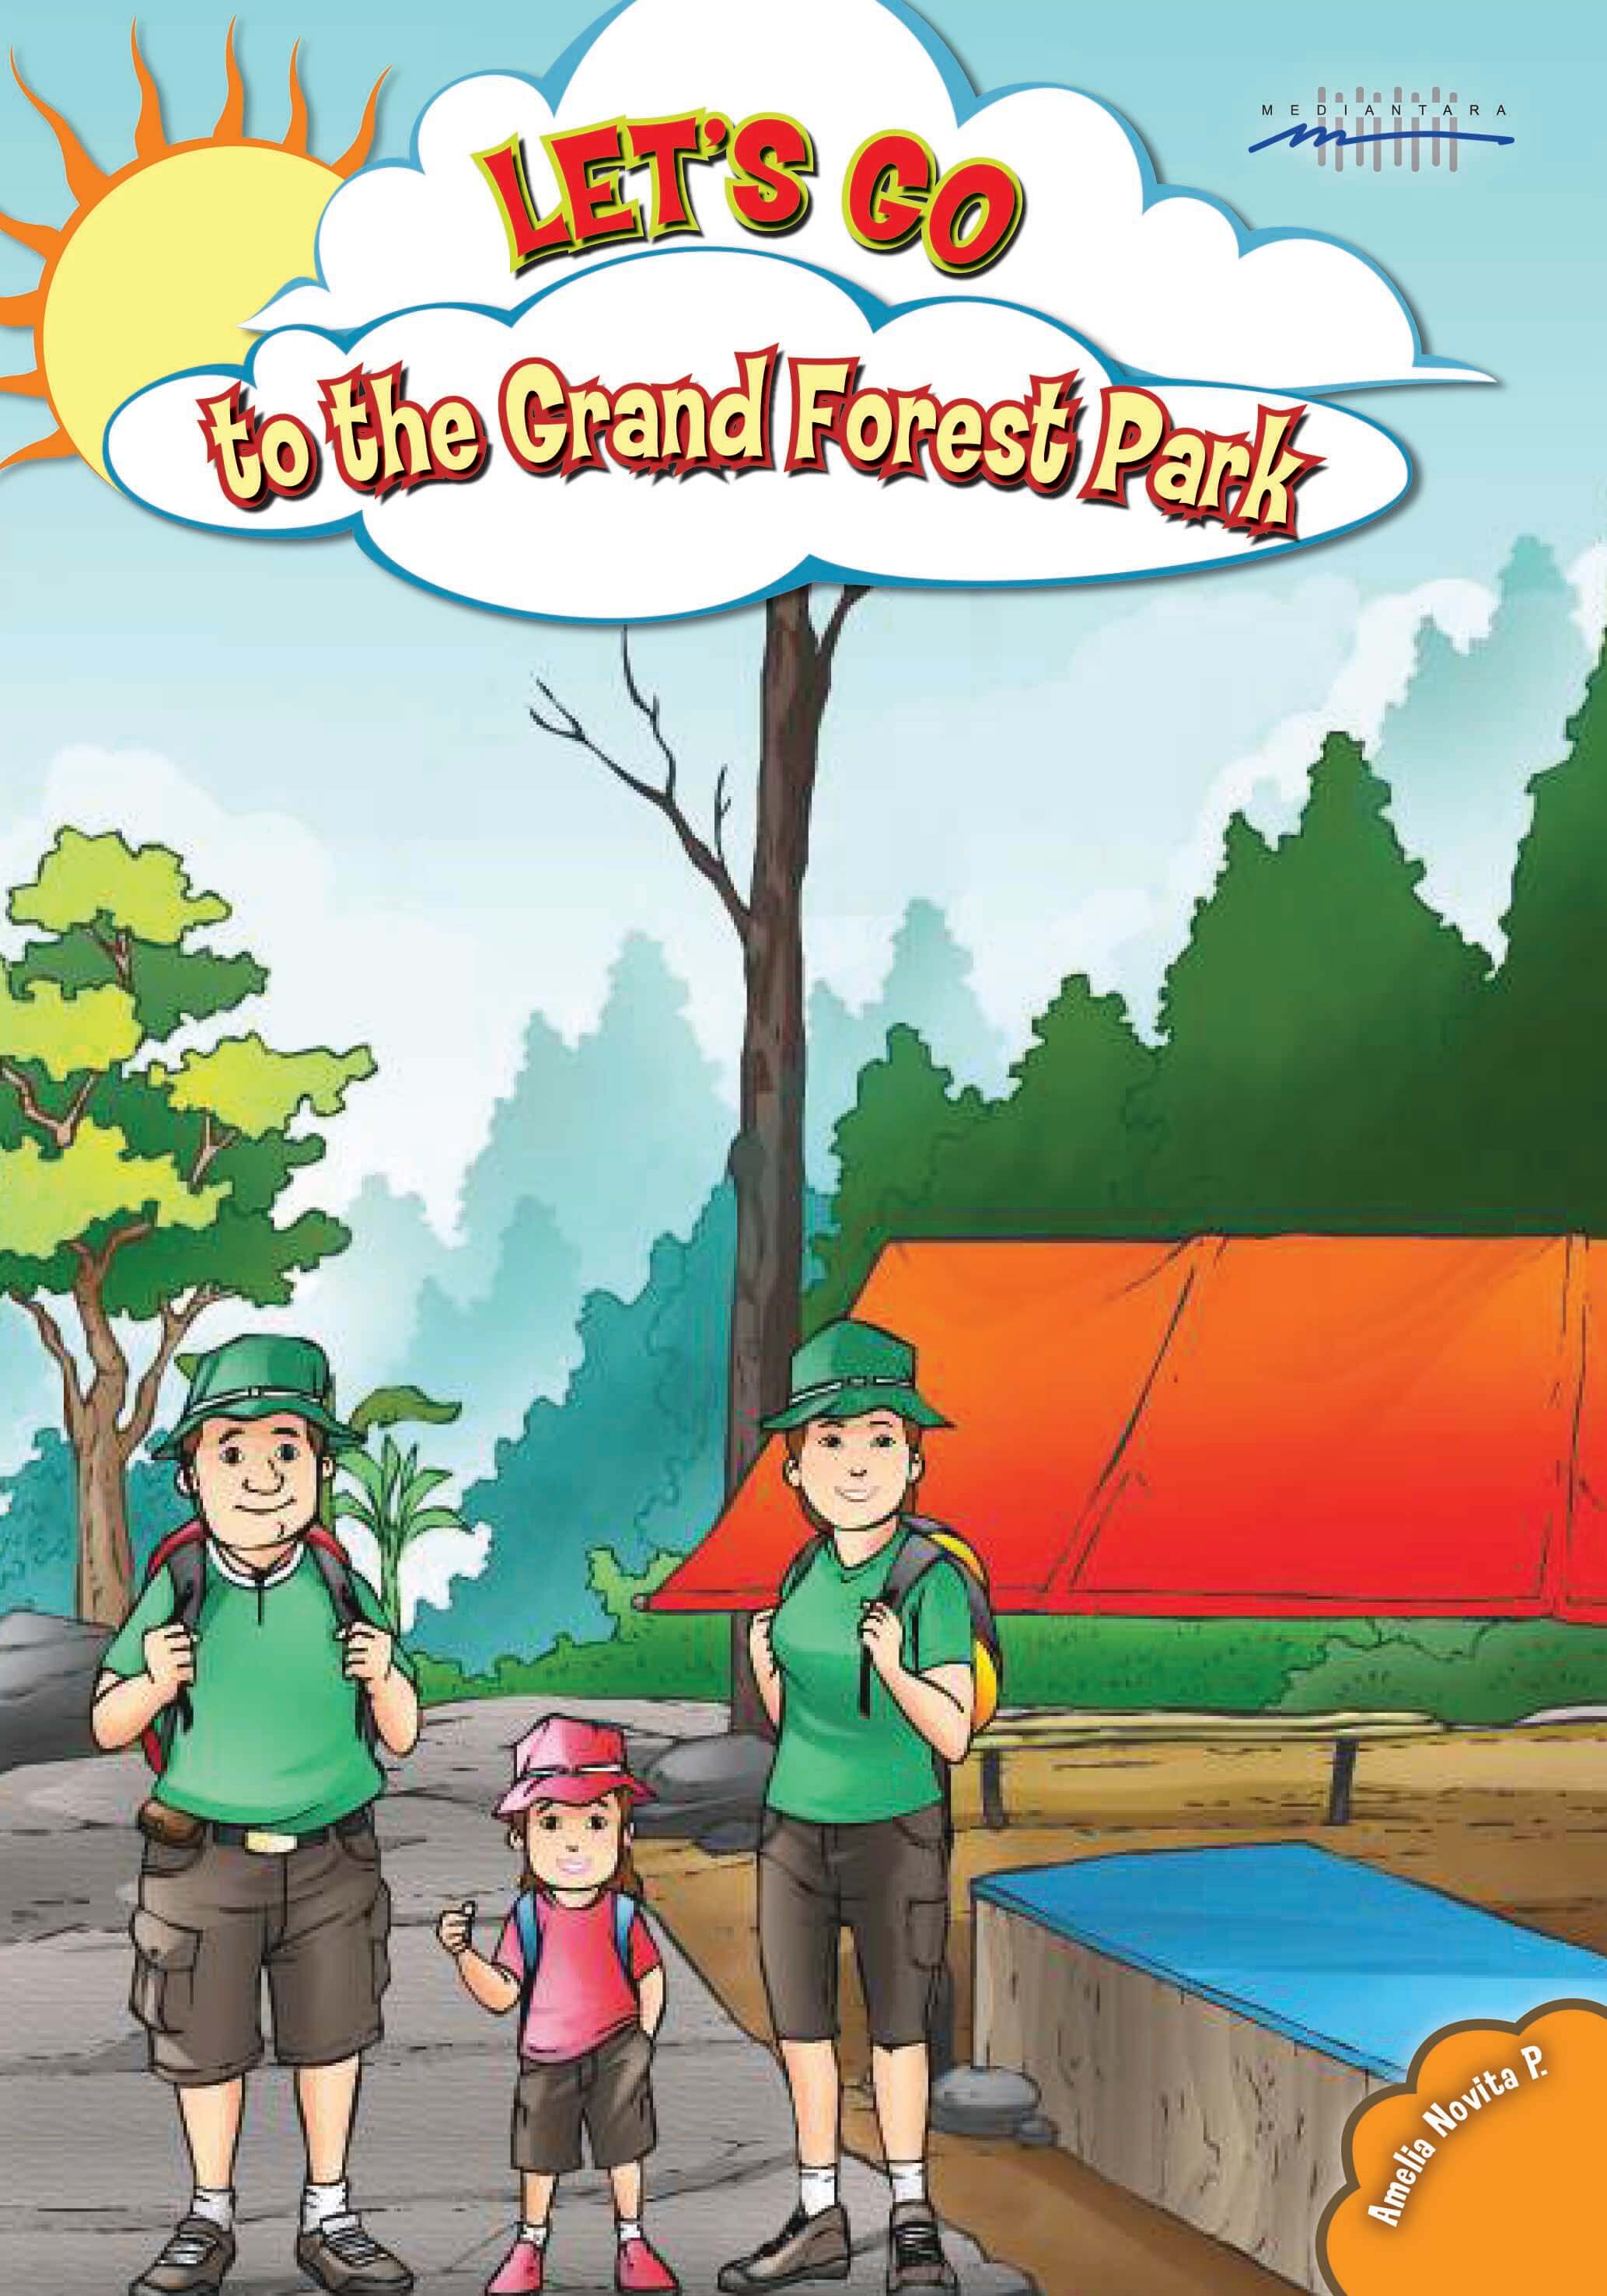 Let's Go To Grand Forest Park